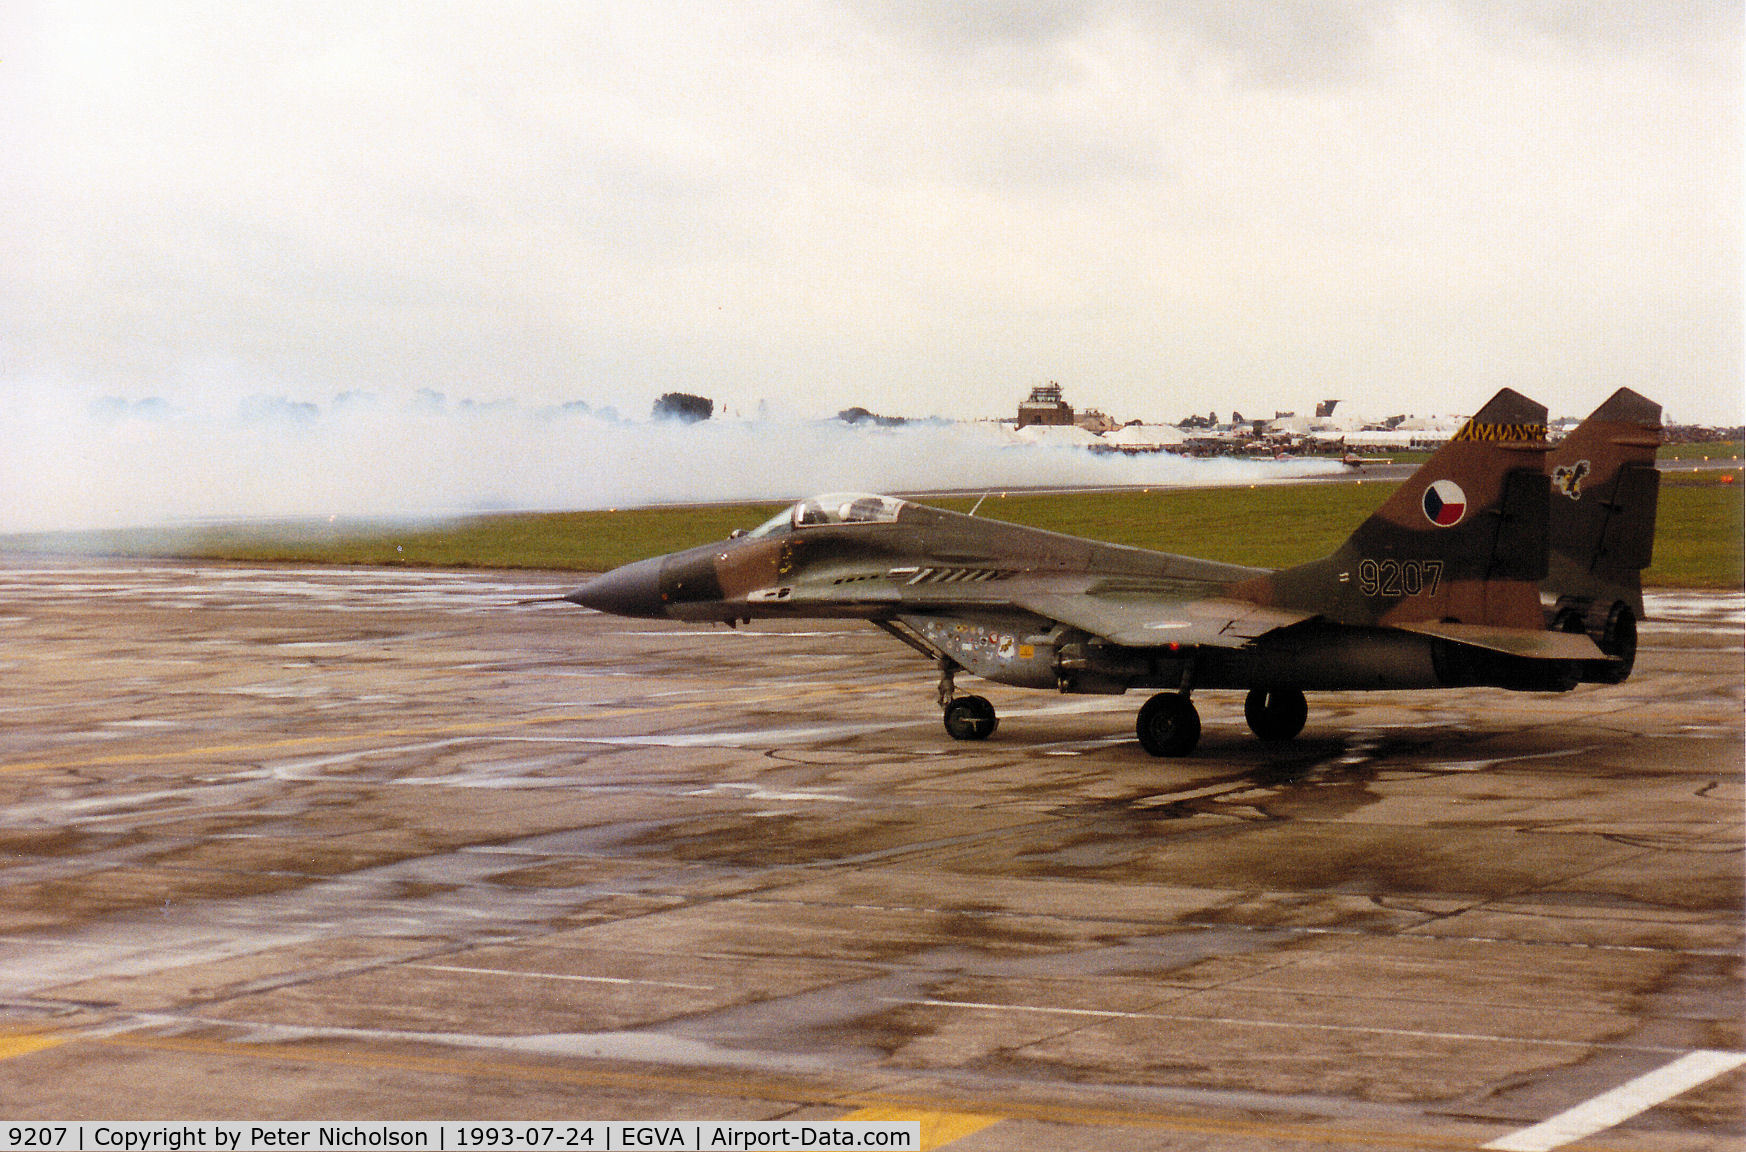 9207, Mikoyan-Gurevich MiG-29A C/N 26392, MiG-29A Fulcrum of the Czech Air Force awaiting clearance to join the active runway at the 1993 Intnl Air Tattoo at RAF Fairford.